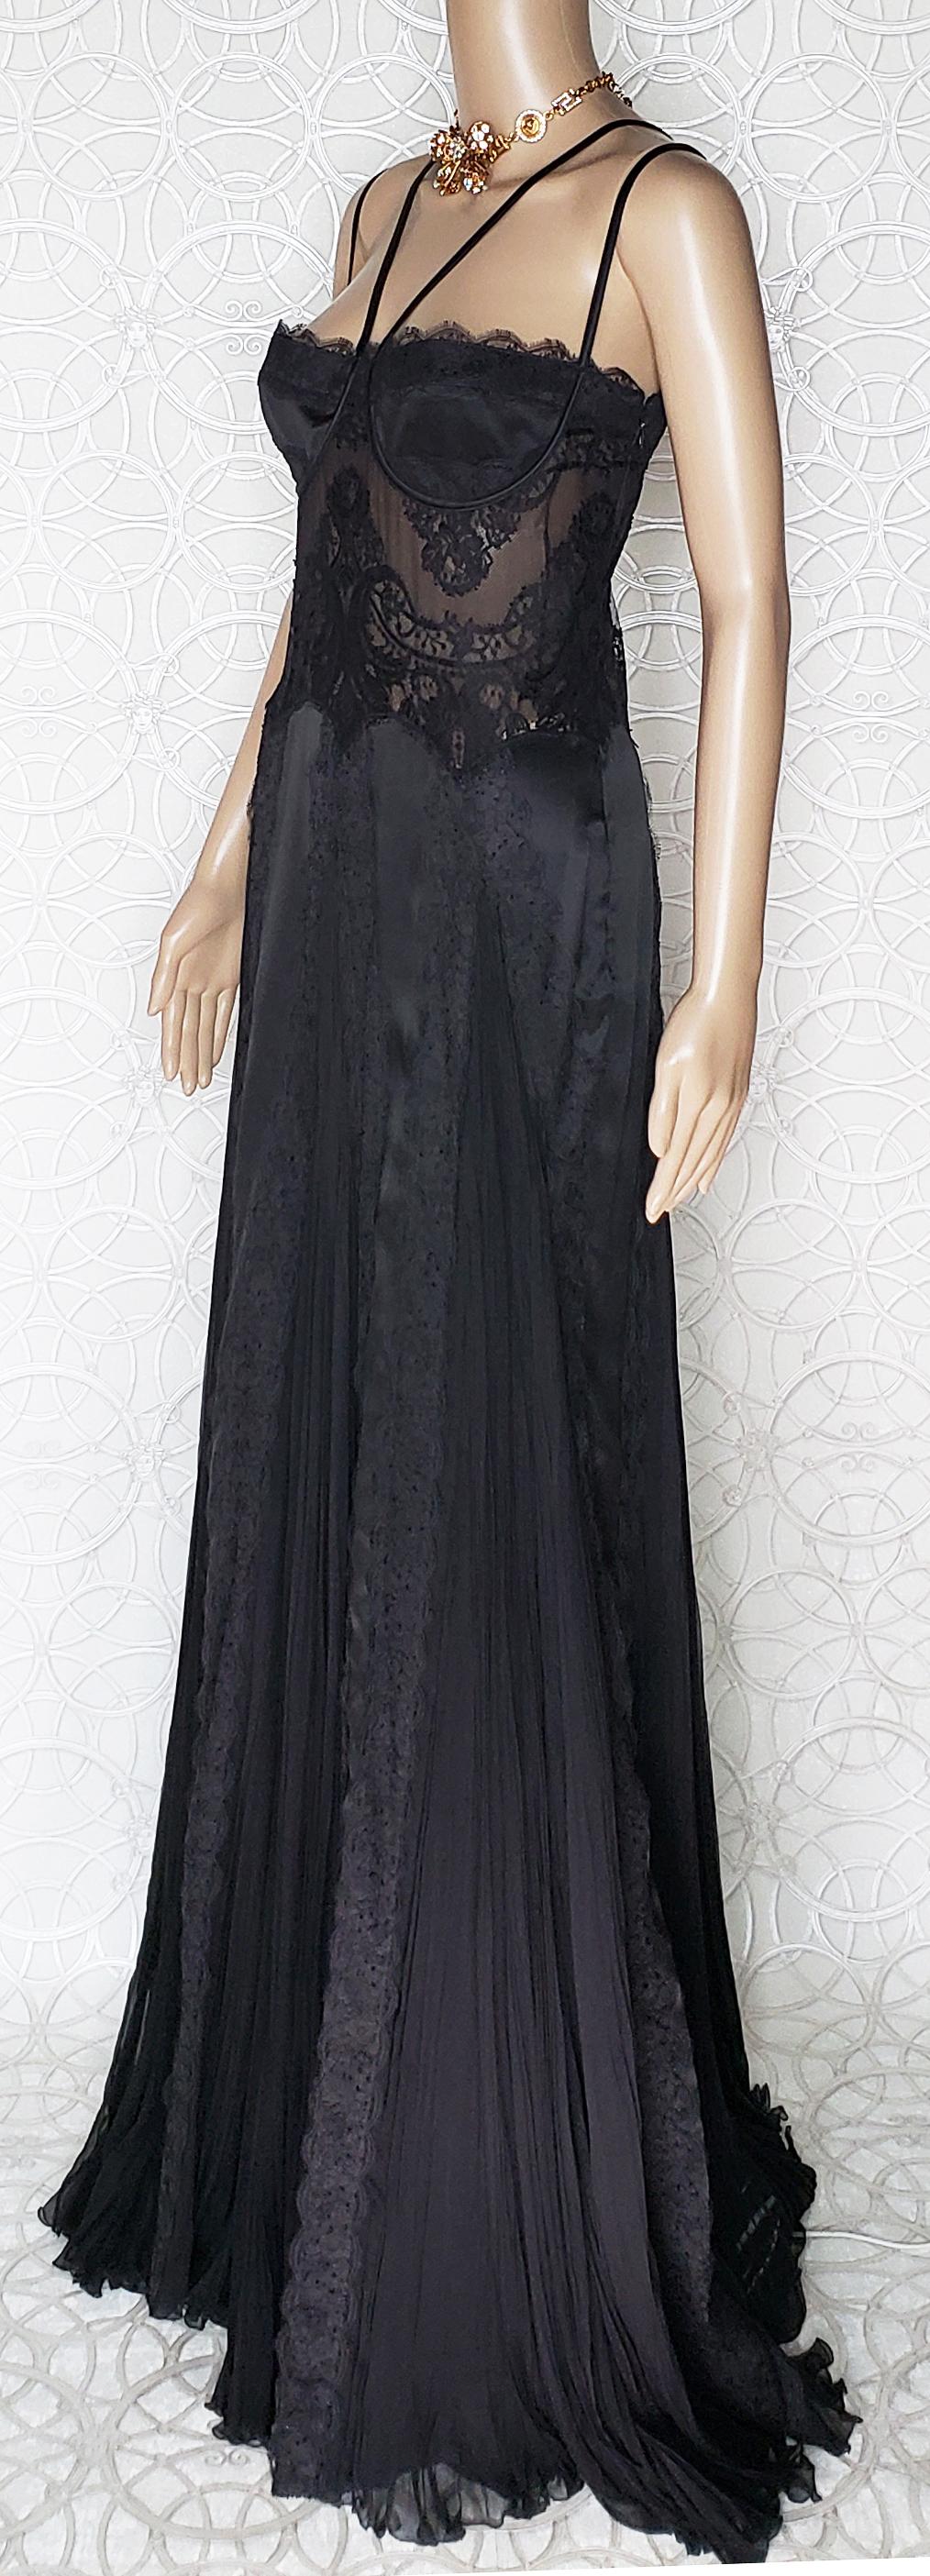 Fall 2003/2004 VINTAGE VERSACE BLACK SILK DRESS GOWN W/SHEER LACE Bodice  In New Condition For Sale In Montgomery, TX